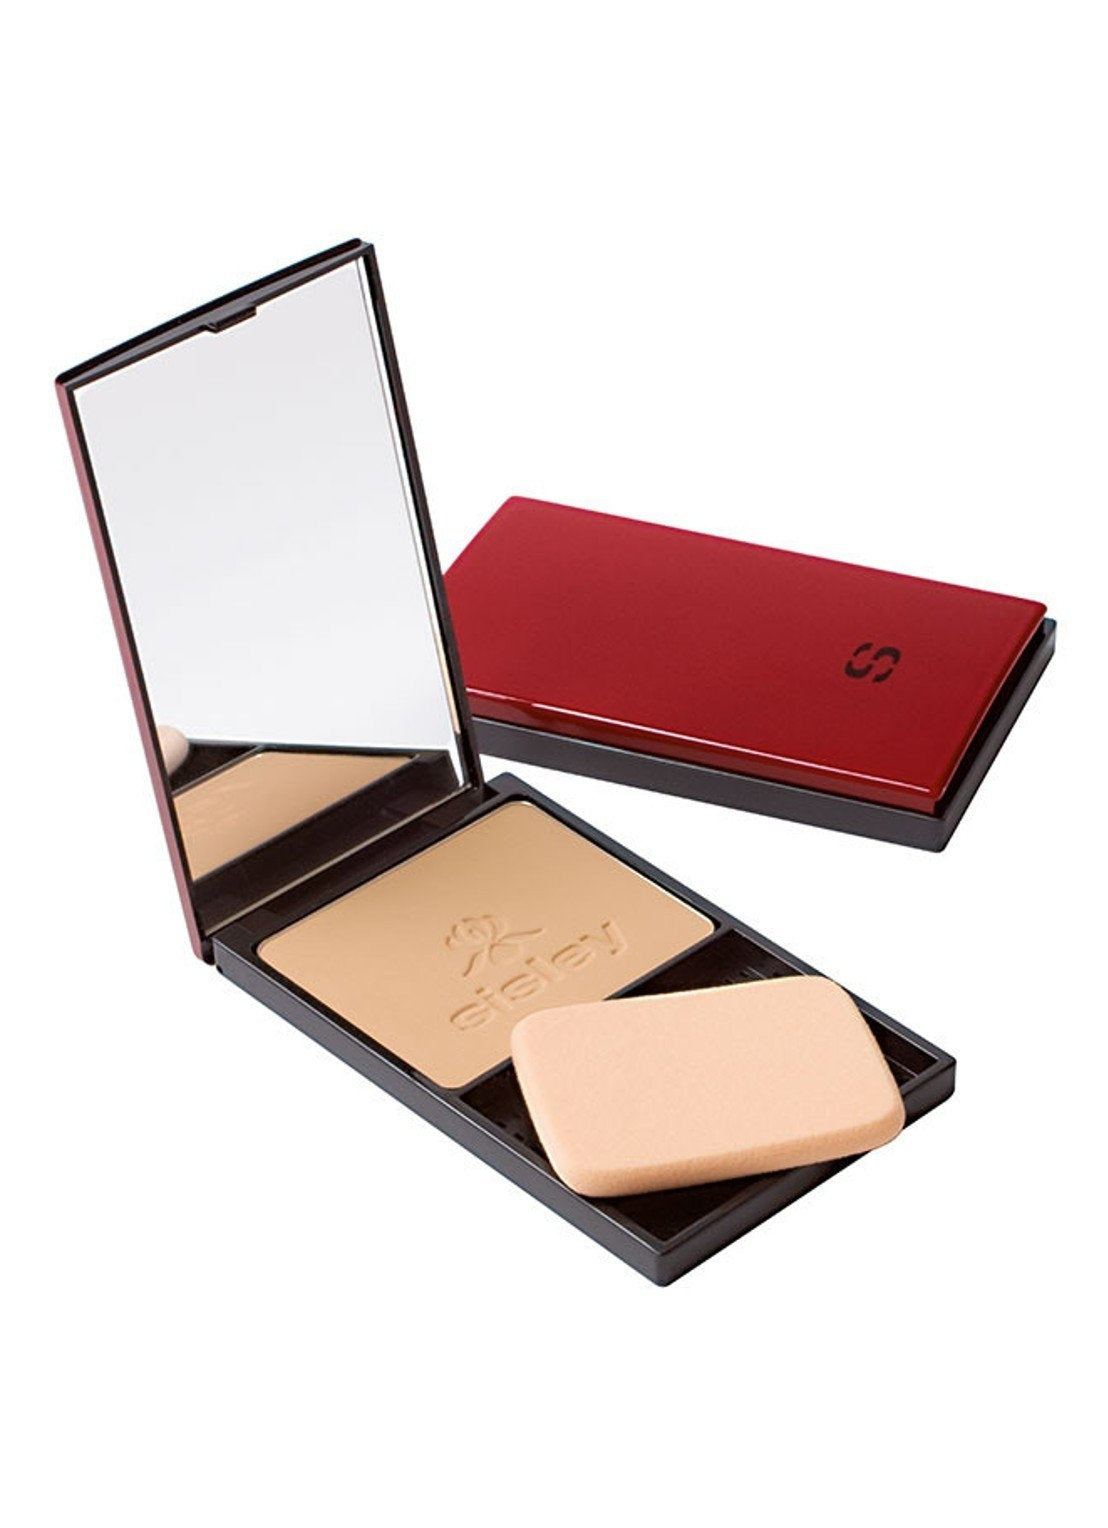 Phyto Teint Eclat Compact - foundation